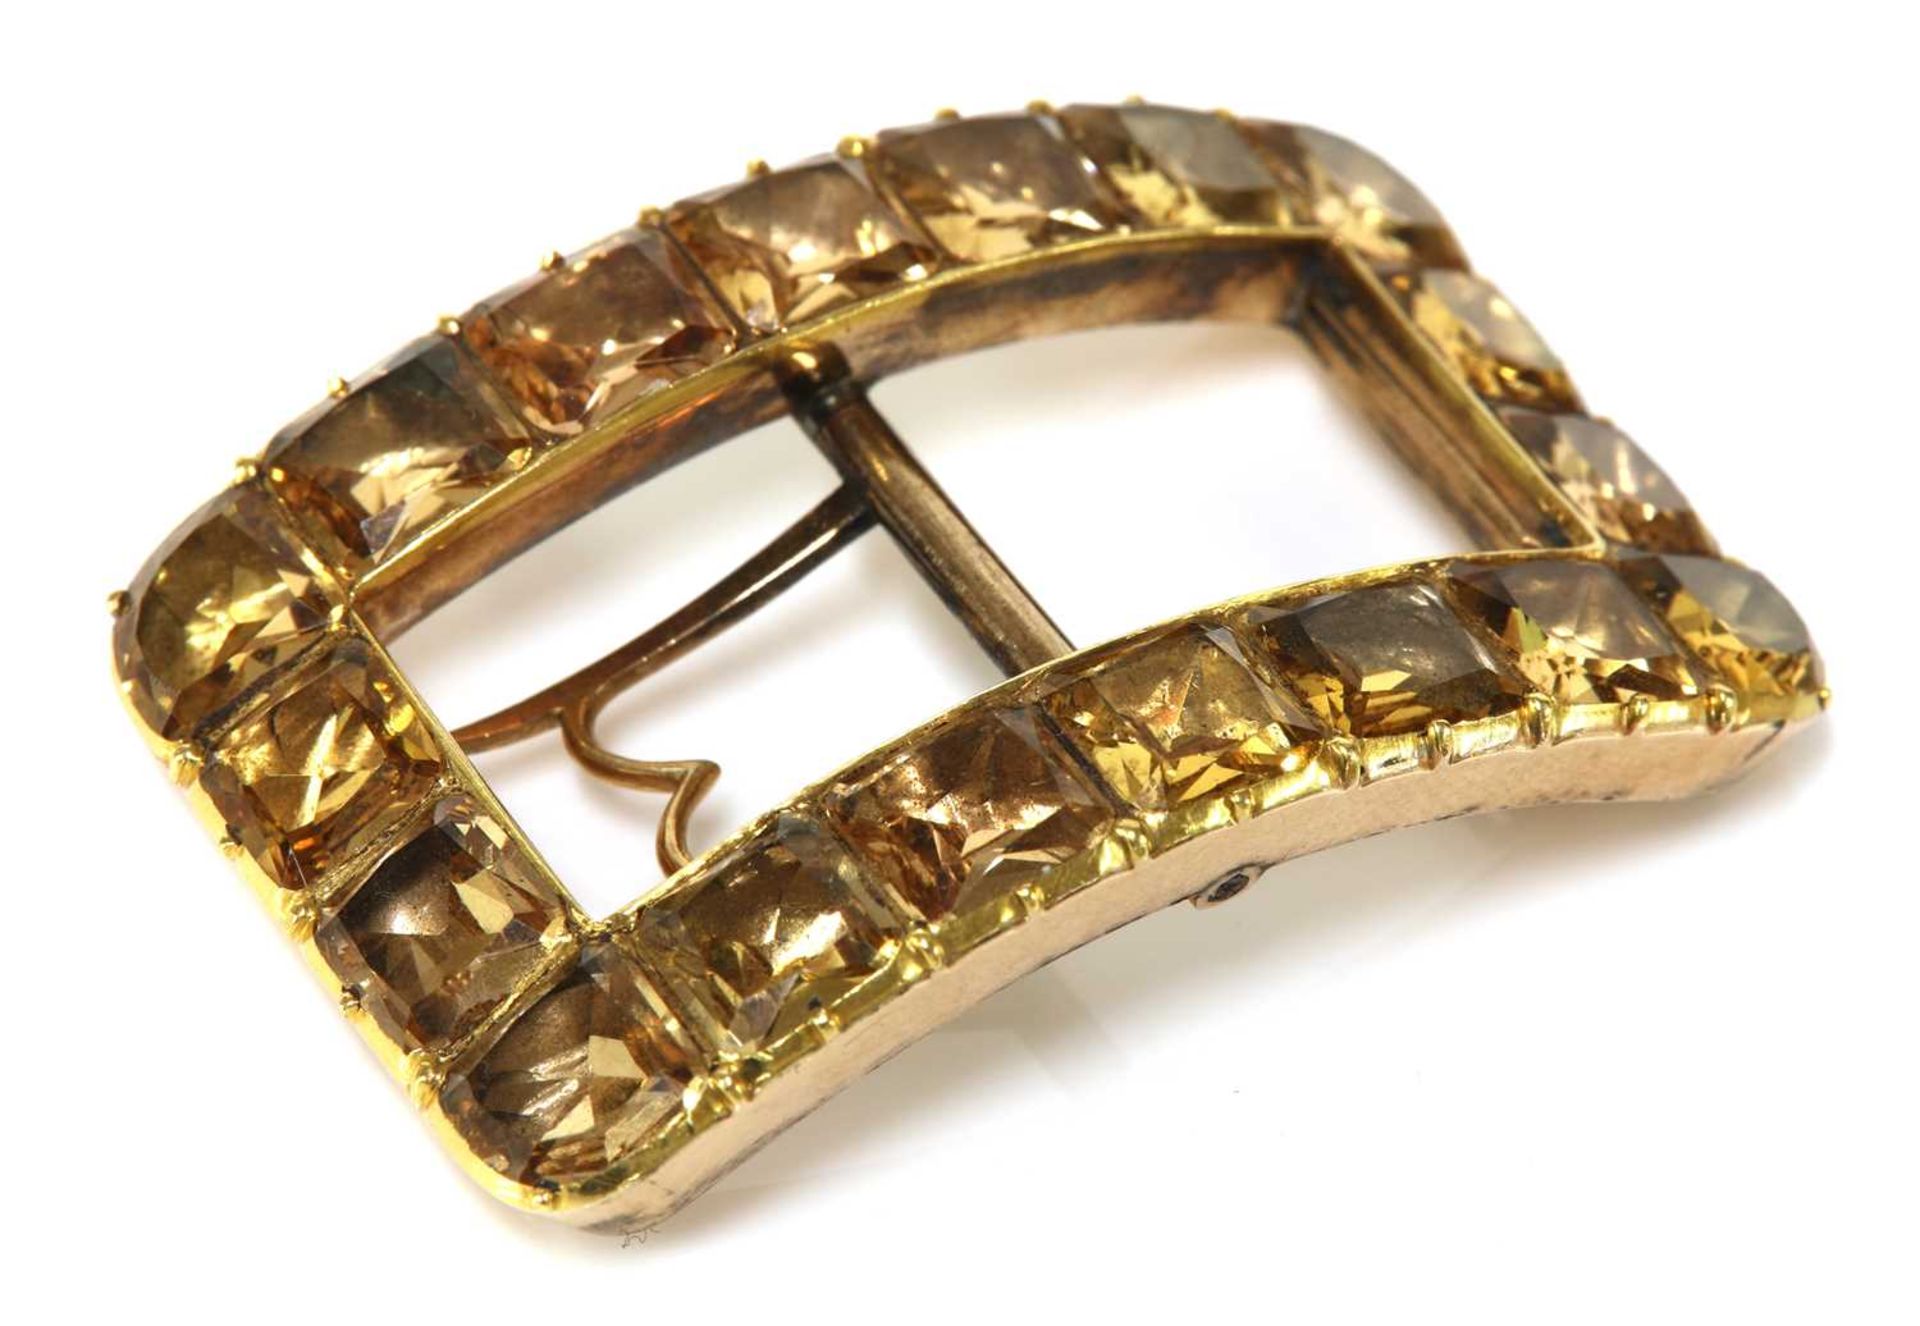 A pair of George III gold mounted topaz shoe buckles, c.1790, - Image 4 of 5